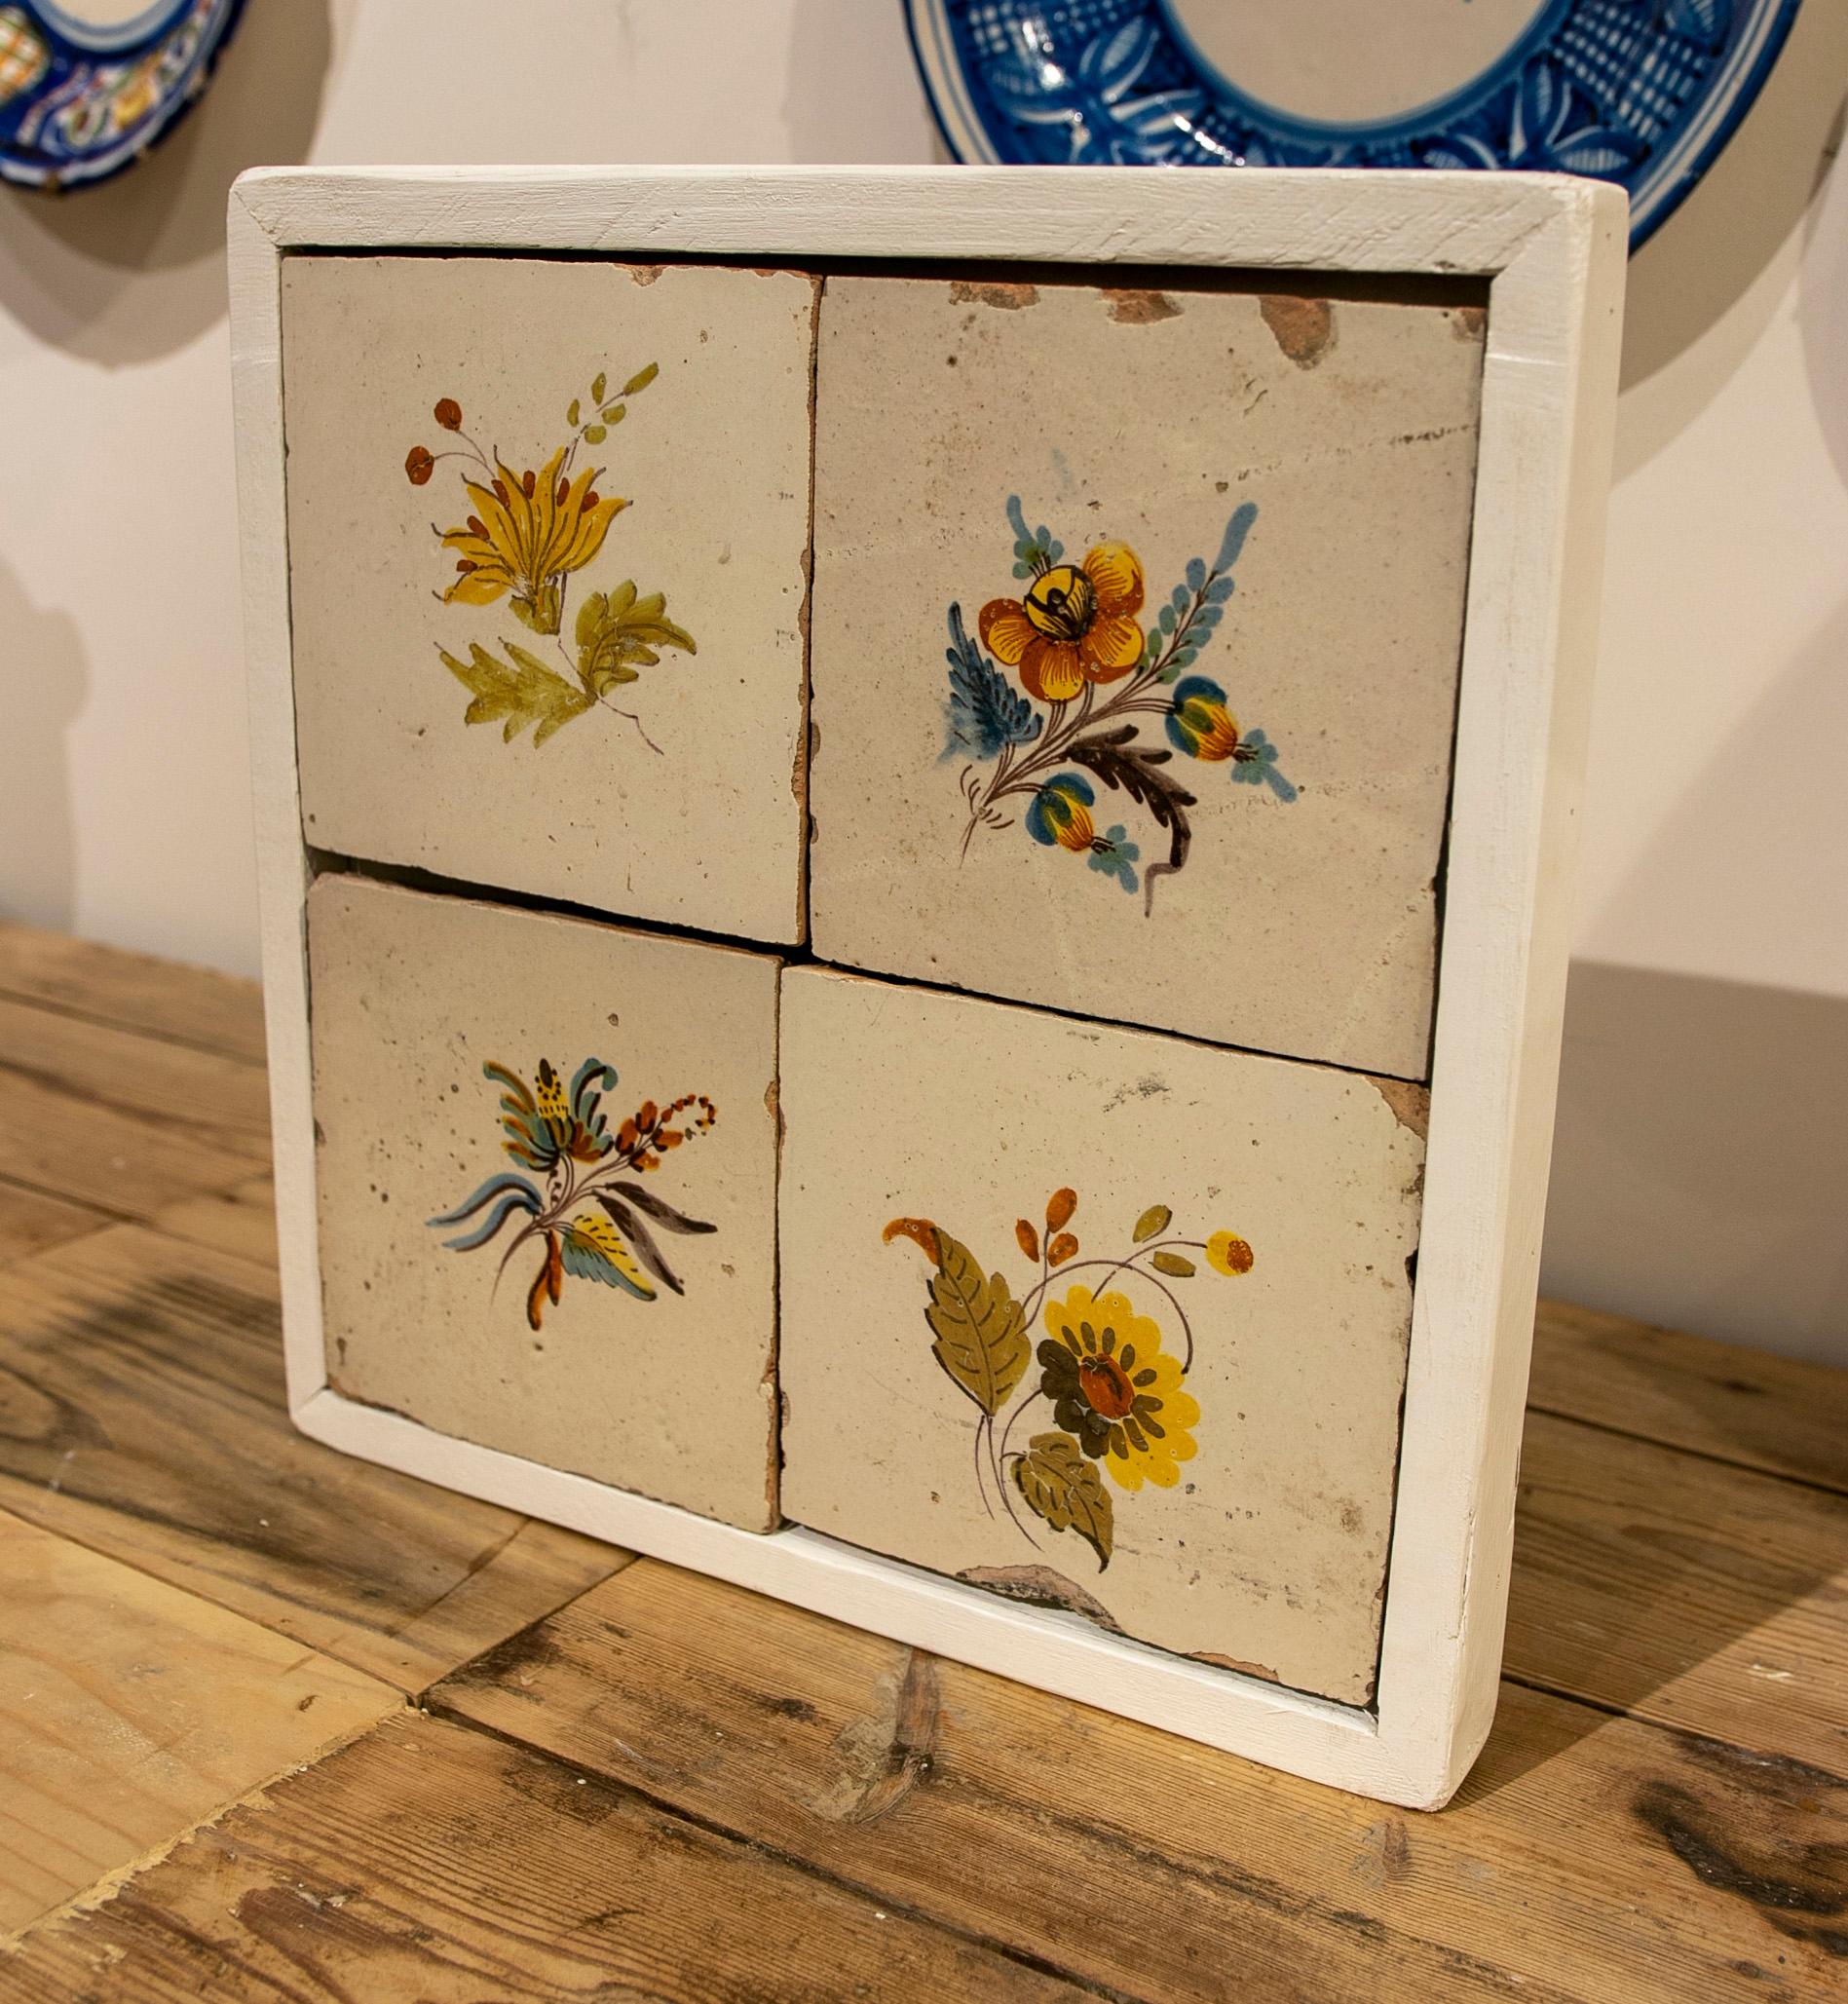 19th Century Spanish set of four hand-painted framed tiles.
The frame measures 37x36cm.